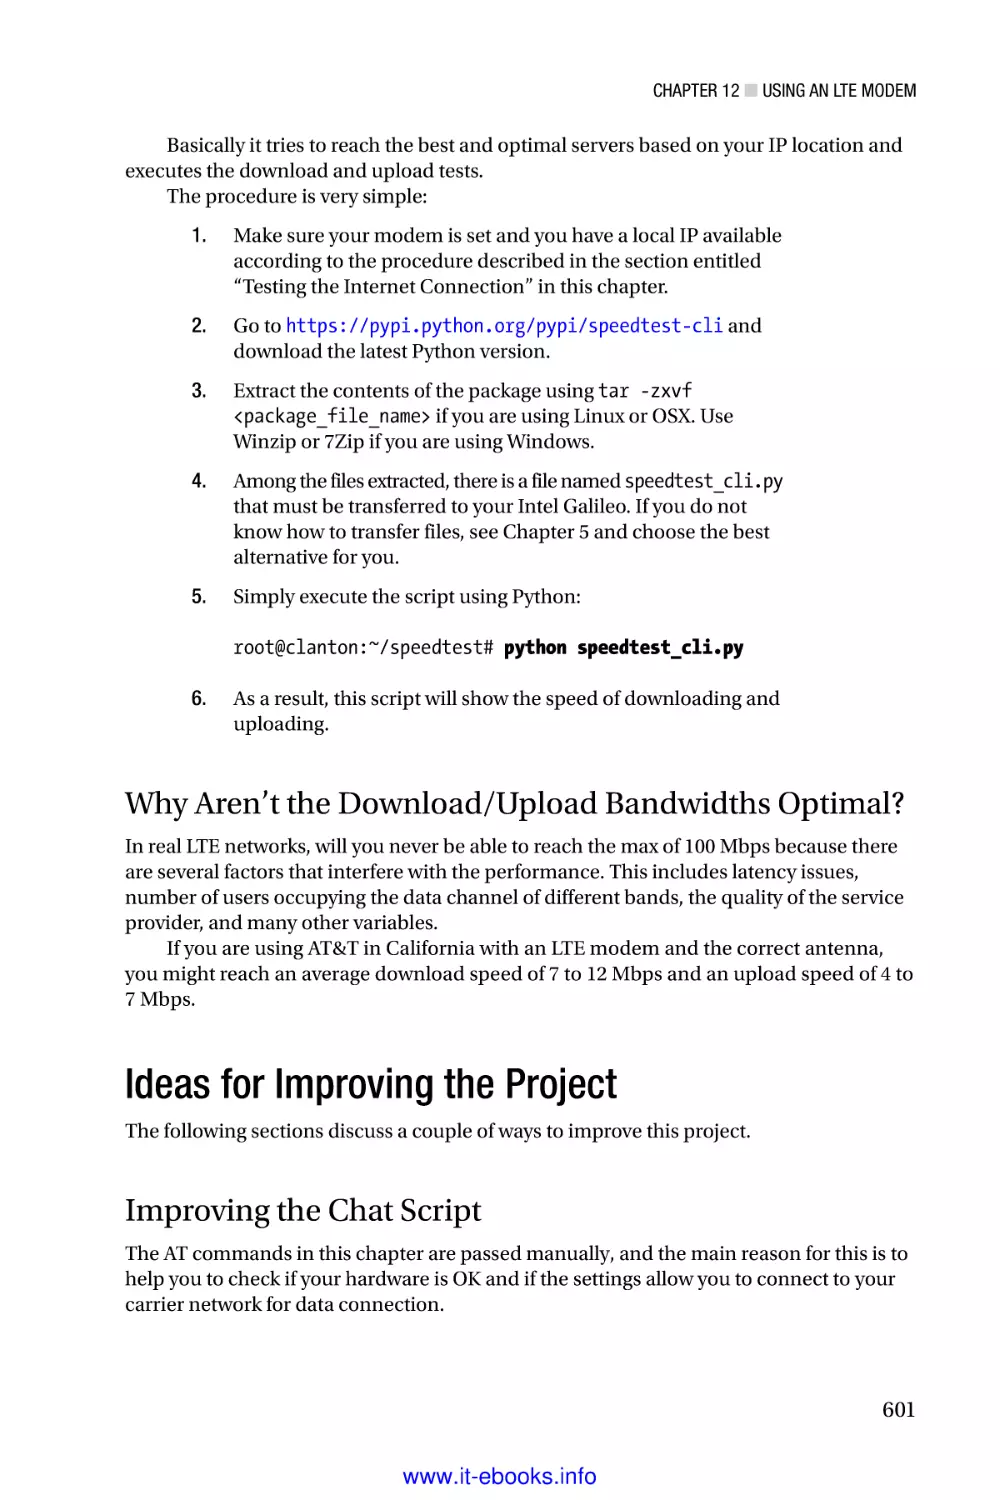 Why Aren’t the Download/Upload Bandwidths Optimal?
Ideas for Improving the Project
Improving the Chat Script